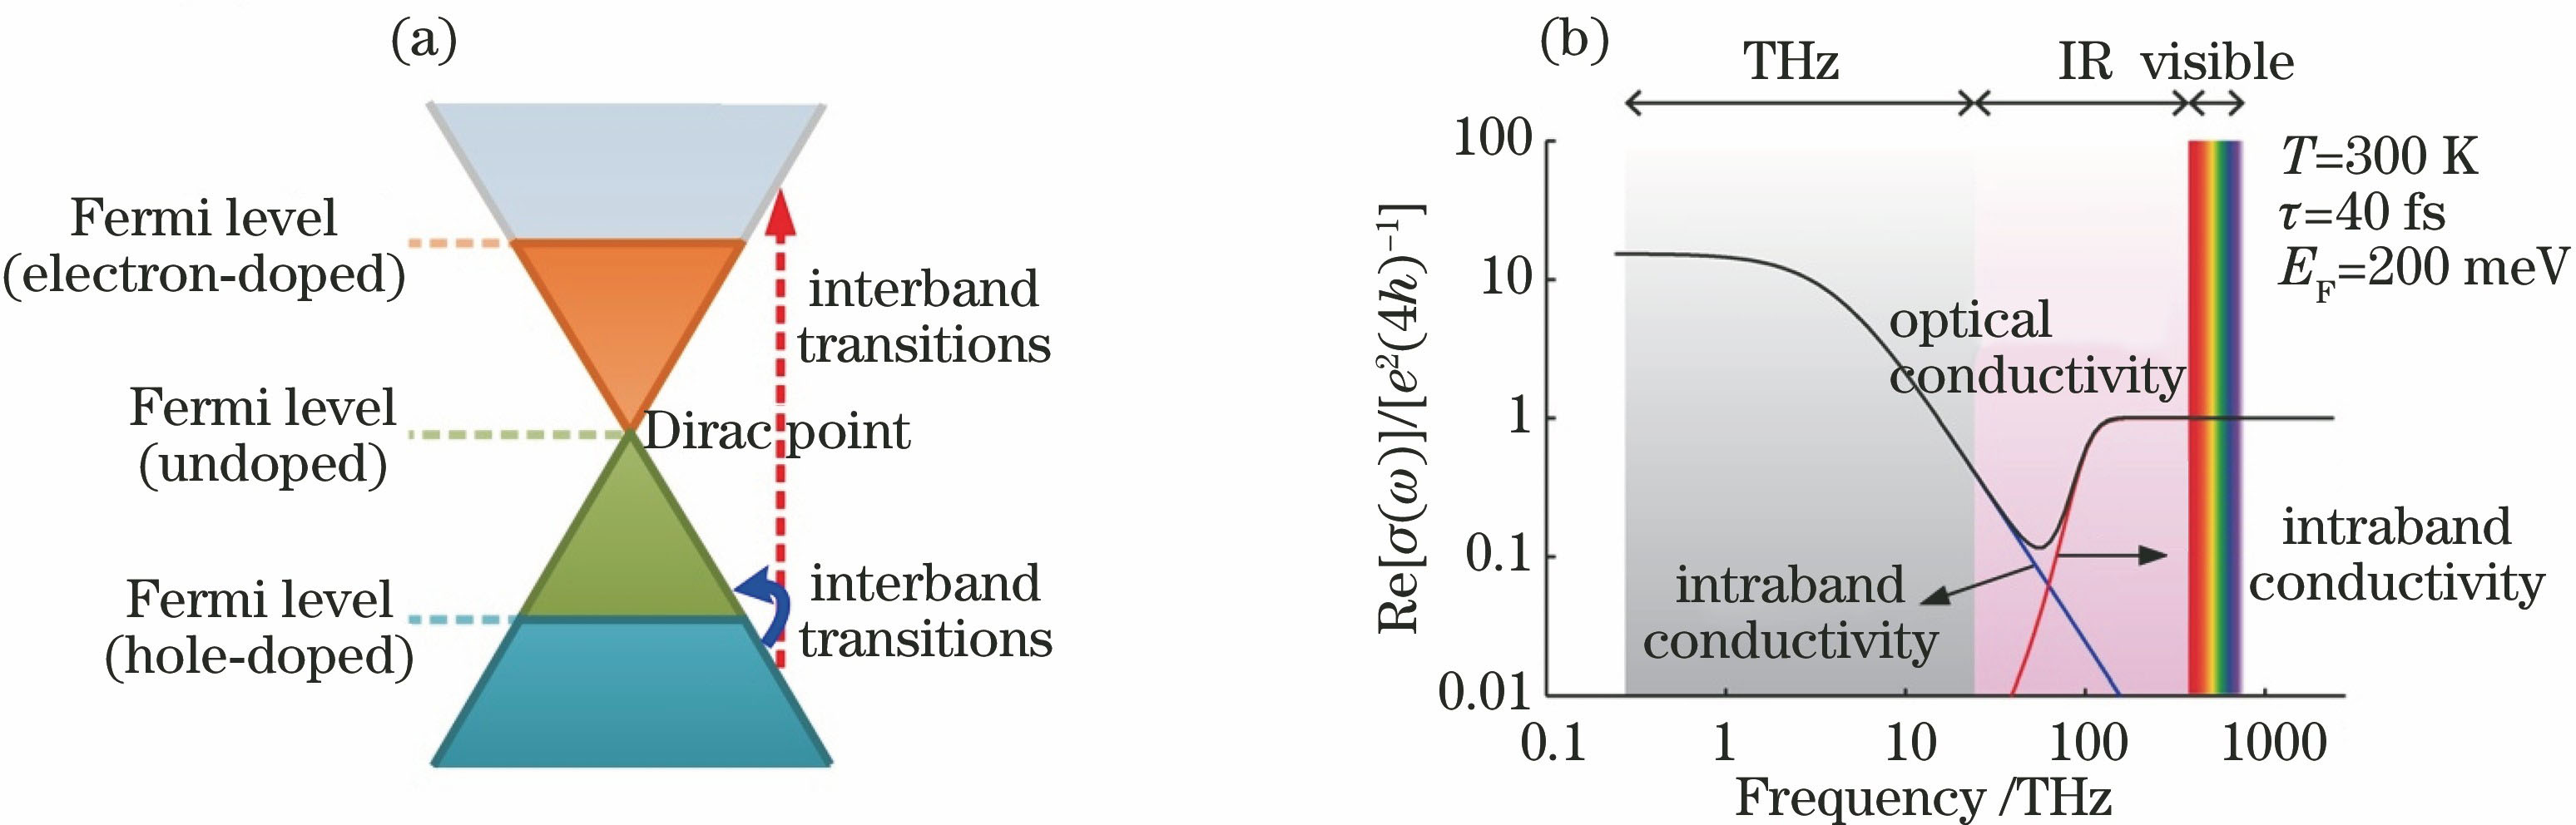 Photoconductivity of graphene. (a) Illustration of graphene energy bands under different doping levels and carrier transitions with intraband transitions for hole-doped graphene as an example; (b) real part of frequency-dependent photoconductivity of single-layer graphene[29]